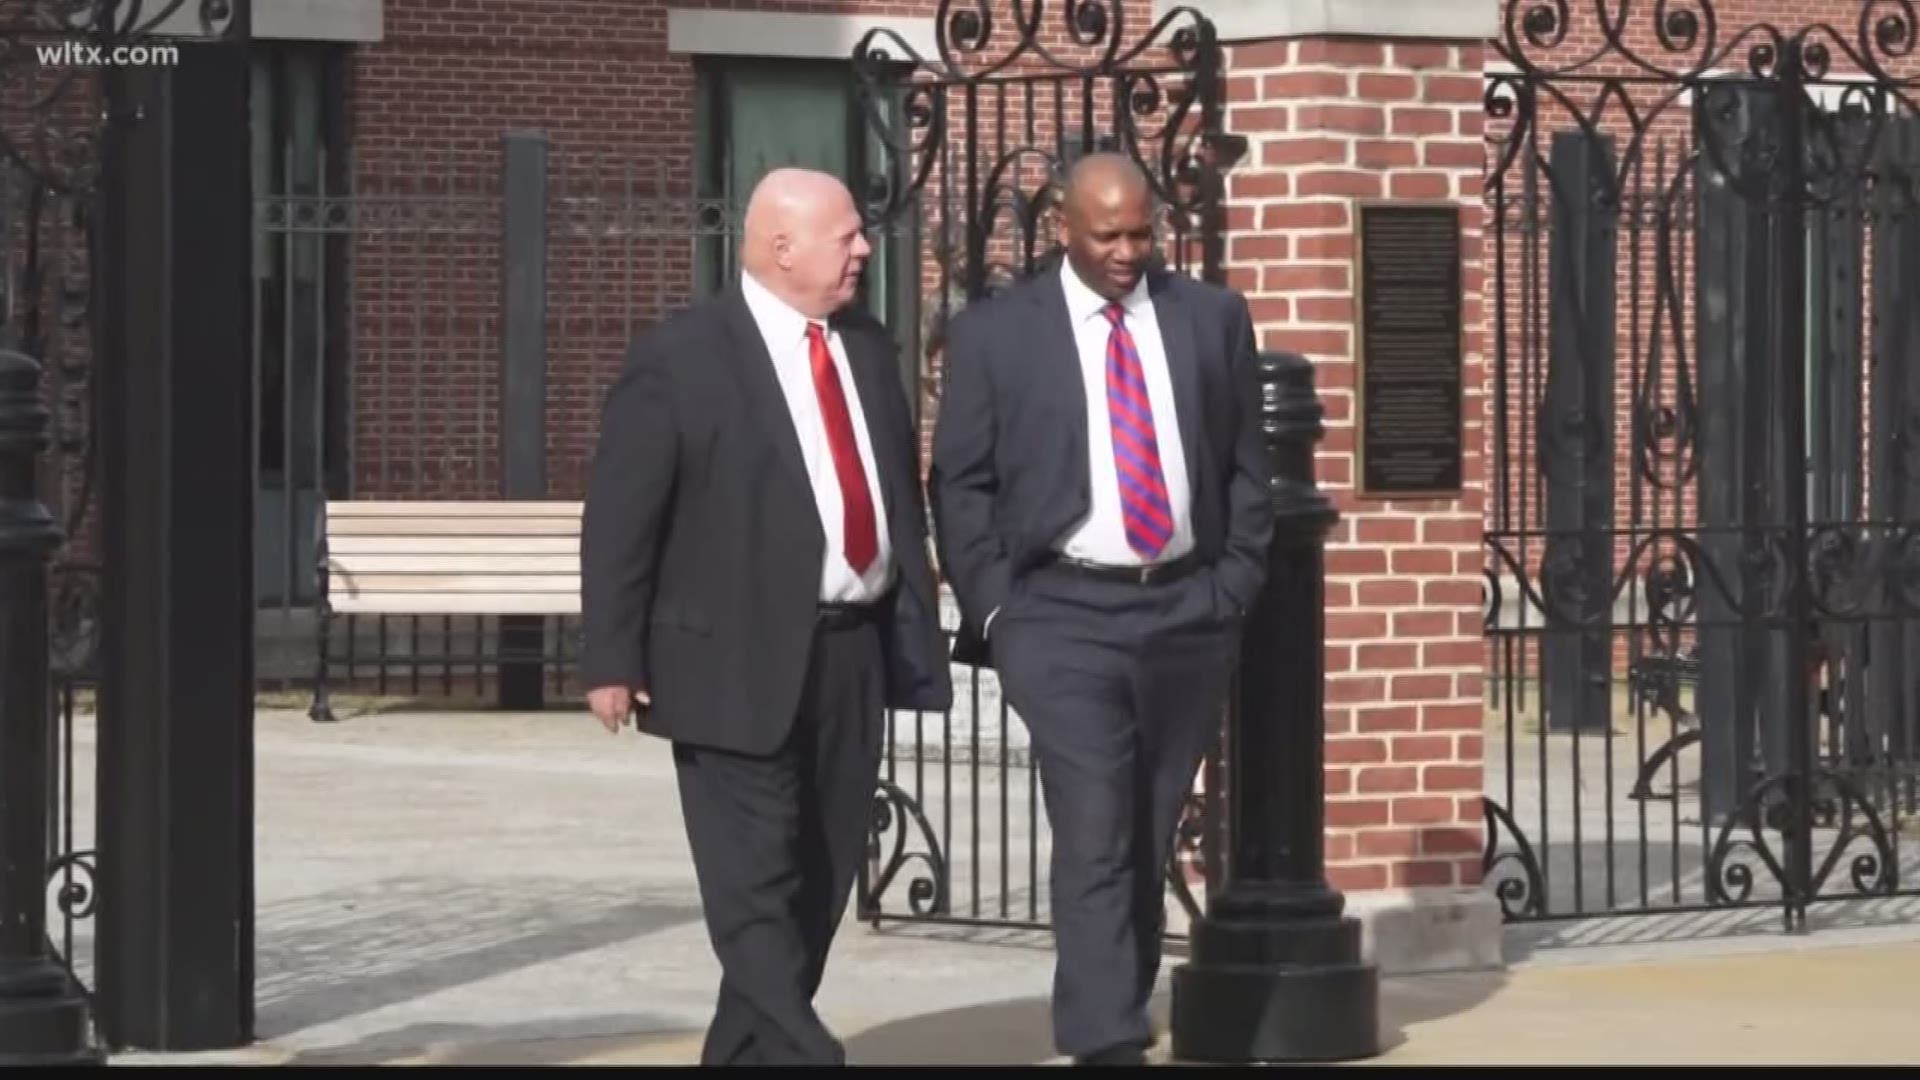 Johnson will be in court on Tuesday and is expected to plead guilty to wire fraud